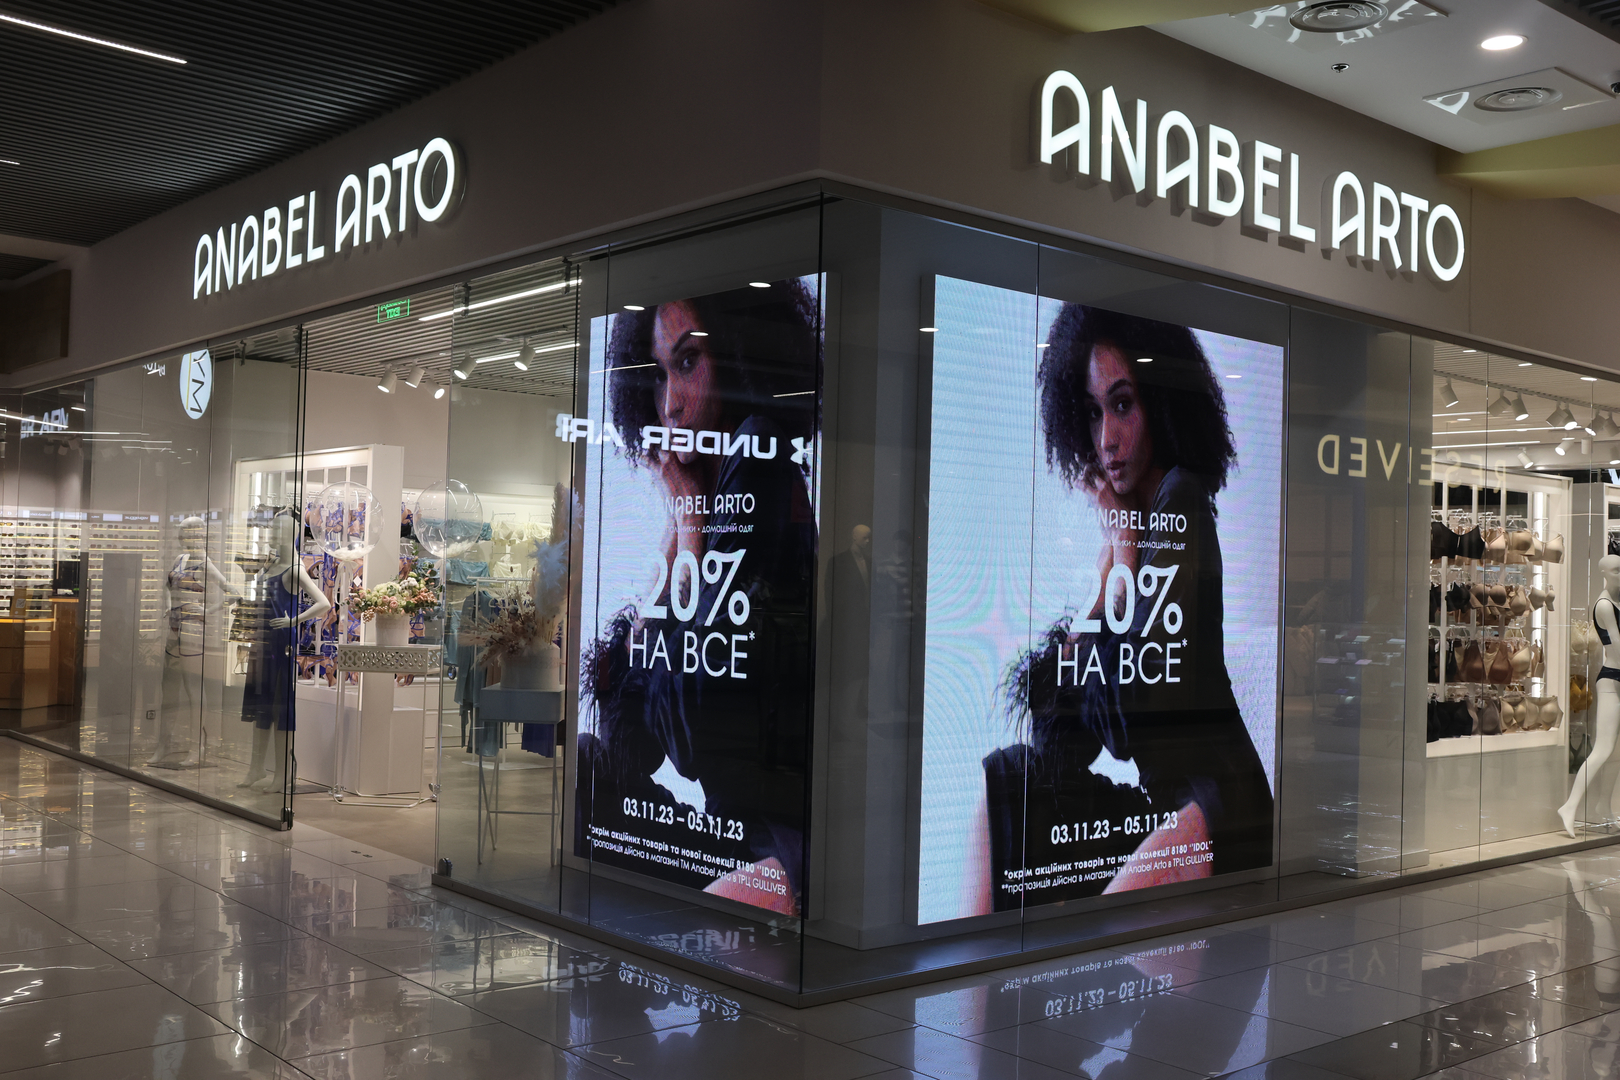 🏅Shop Anabel Arto in the center of Kiev in the Gulliver shopping center